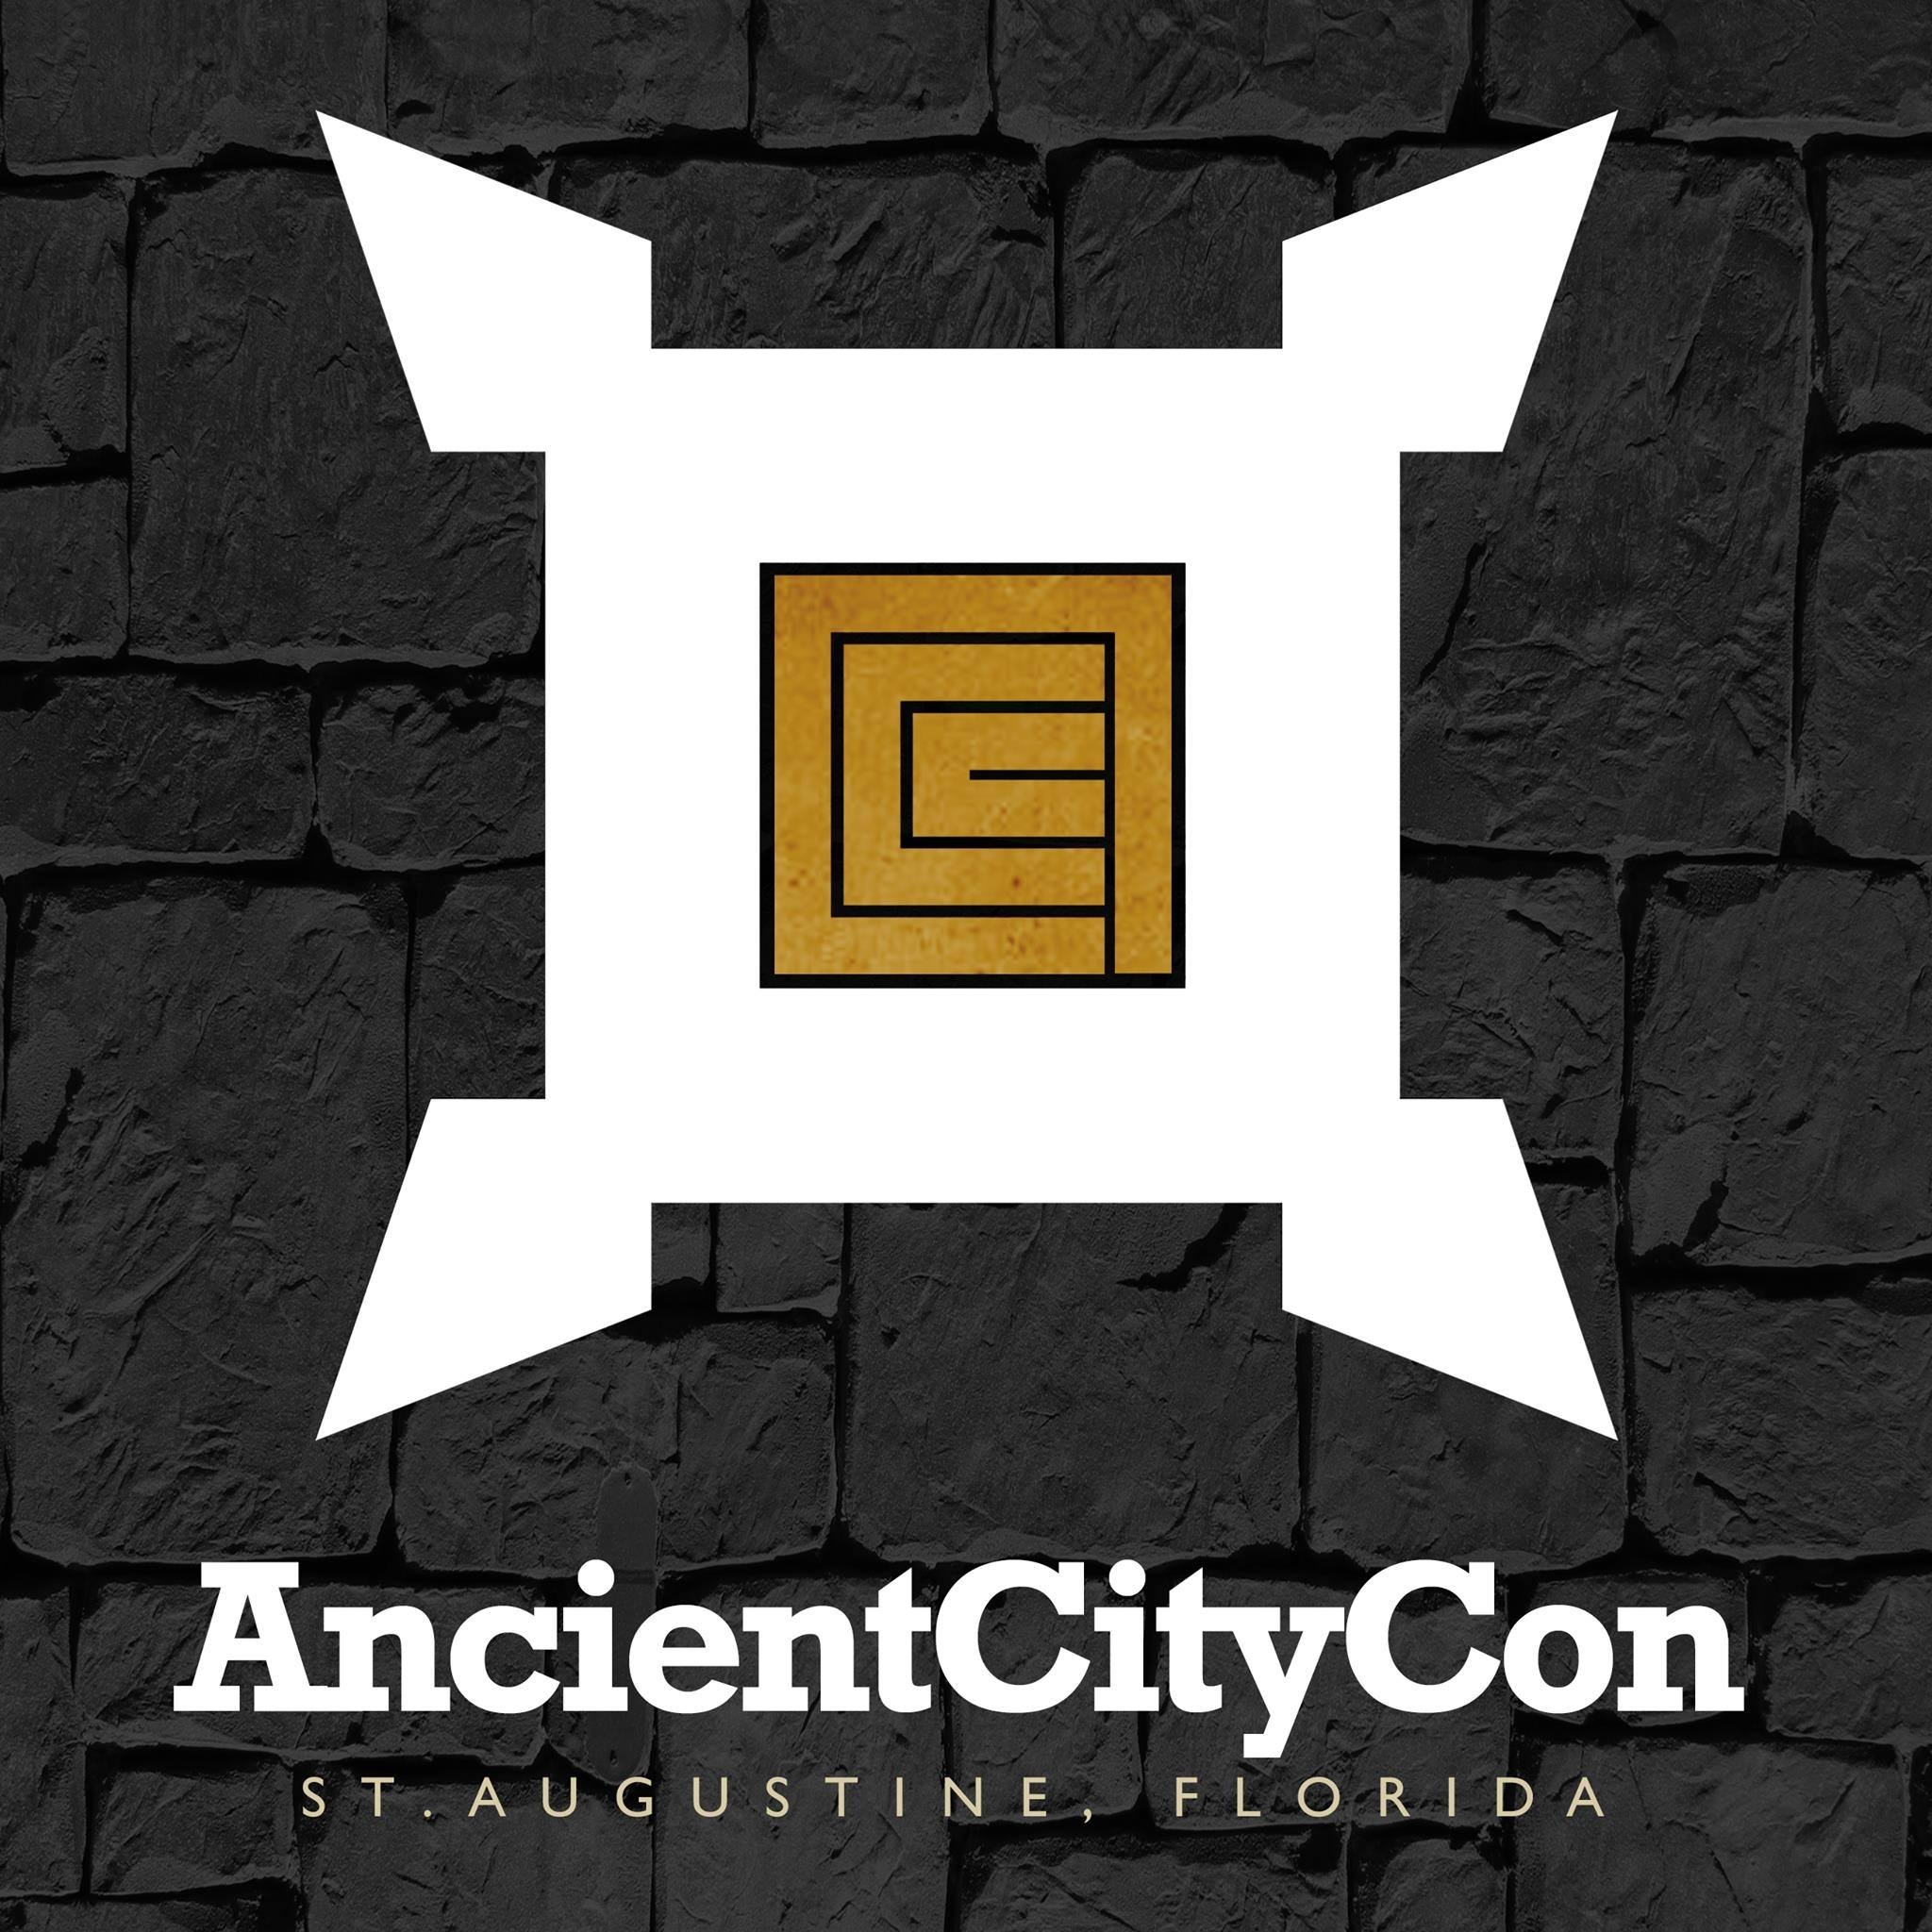 COMIC CON HIGHWAY FLORIDA EXIT:: ANCIENT CITY CON. GUEST STARRING MARTIN PIERRO &  FEATURING: Mr. AnderSiN, WrittenSiNs Comics and INDIE ADVOCATES 2 TABLE 217 IN ARTIST ALLEY on Sept 7-9